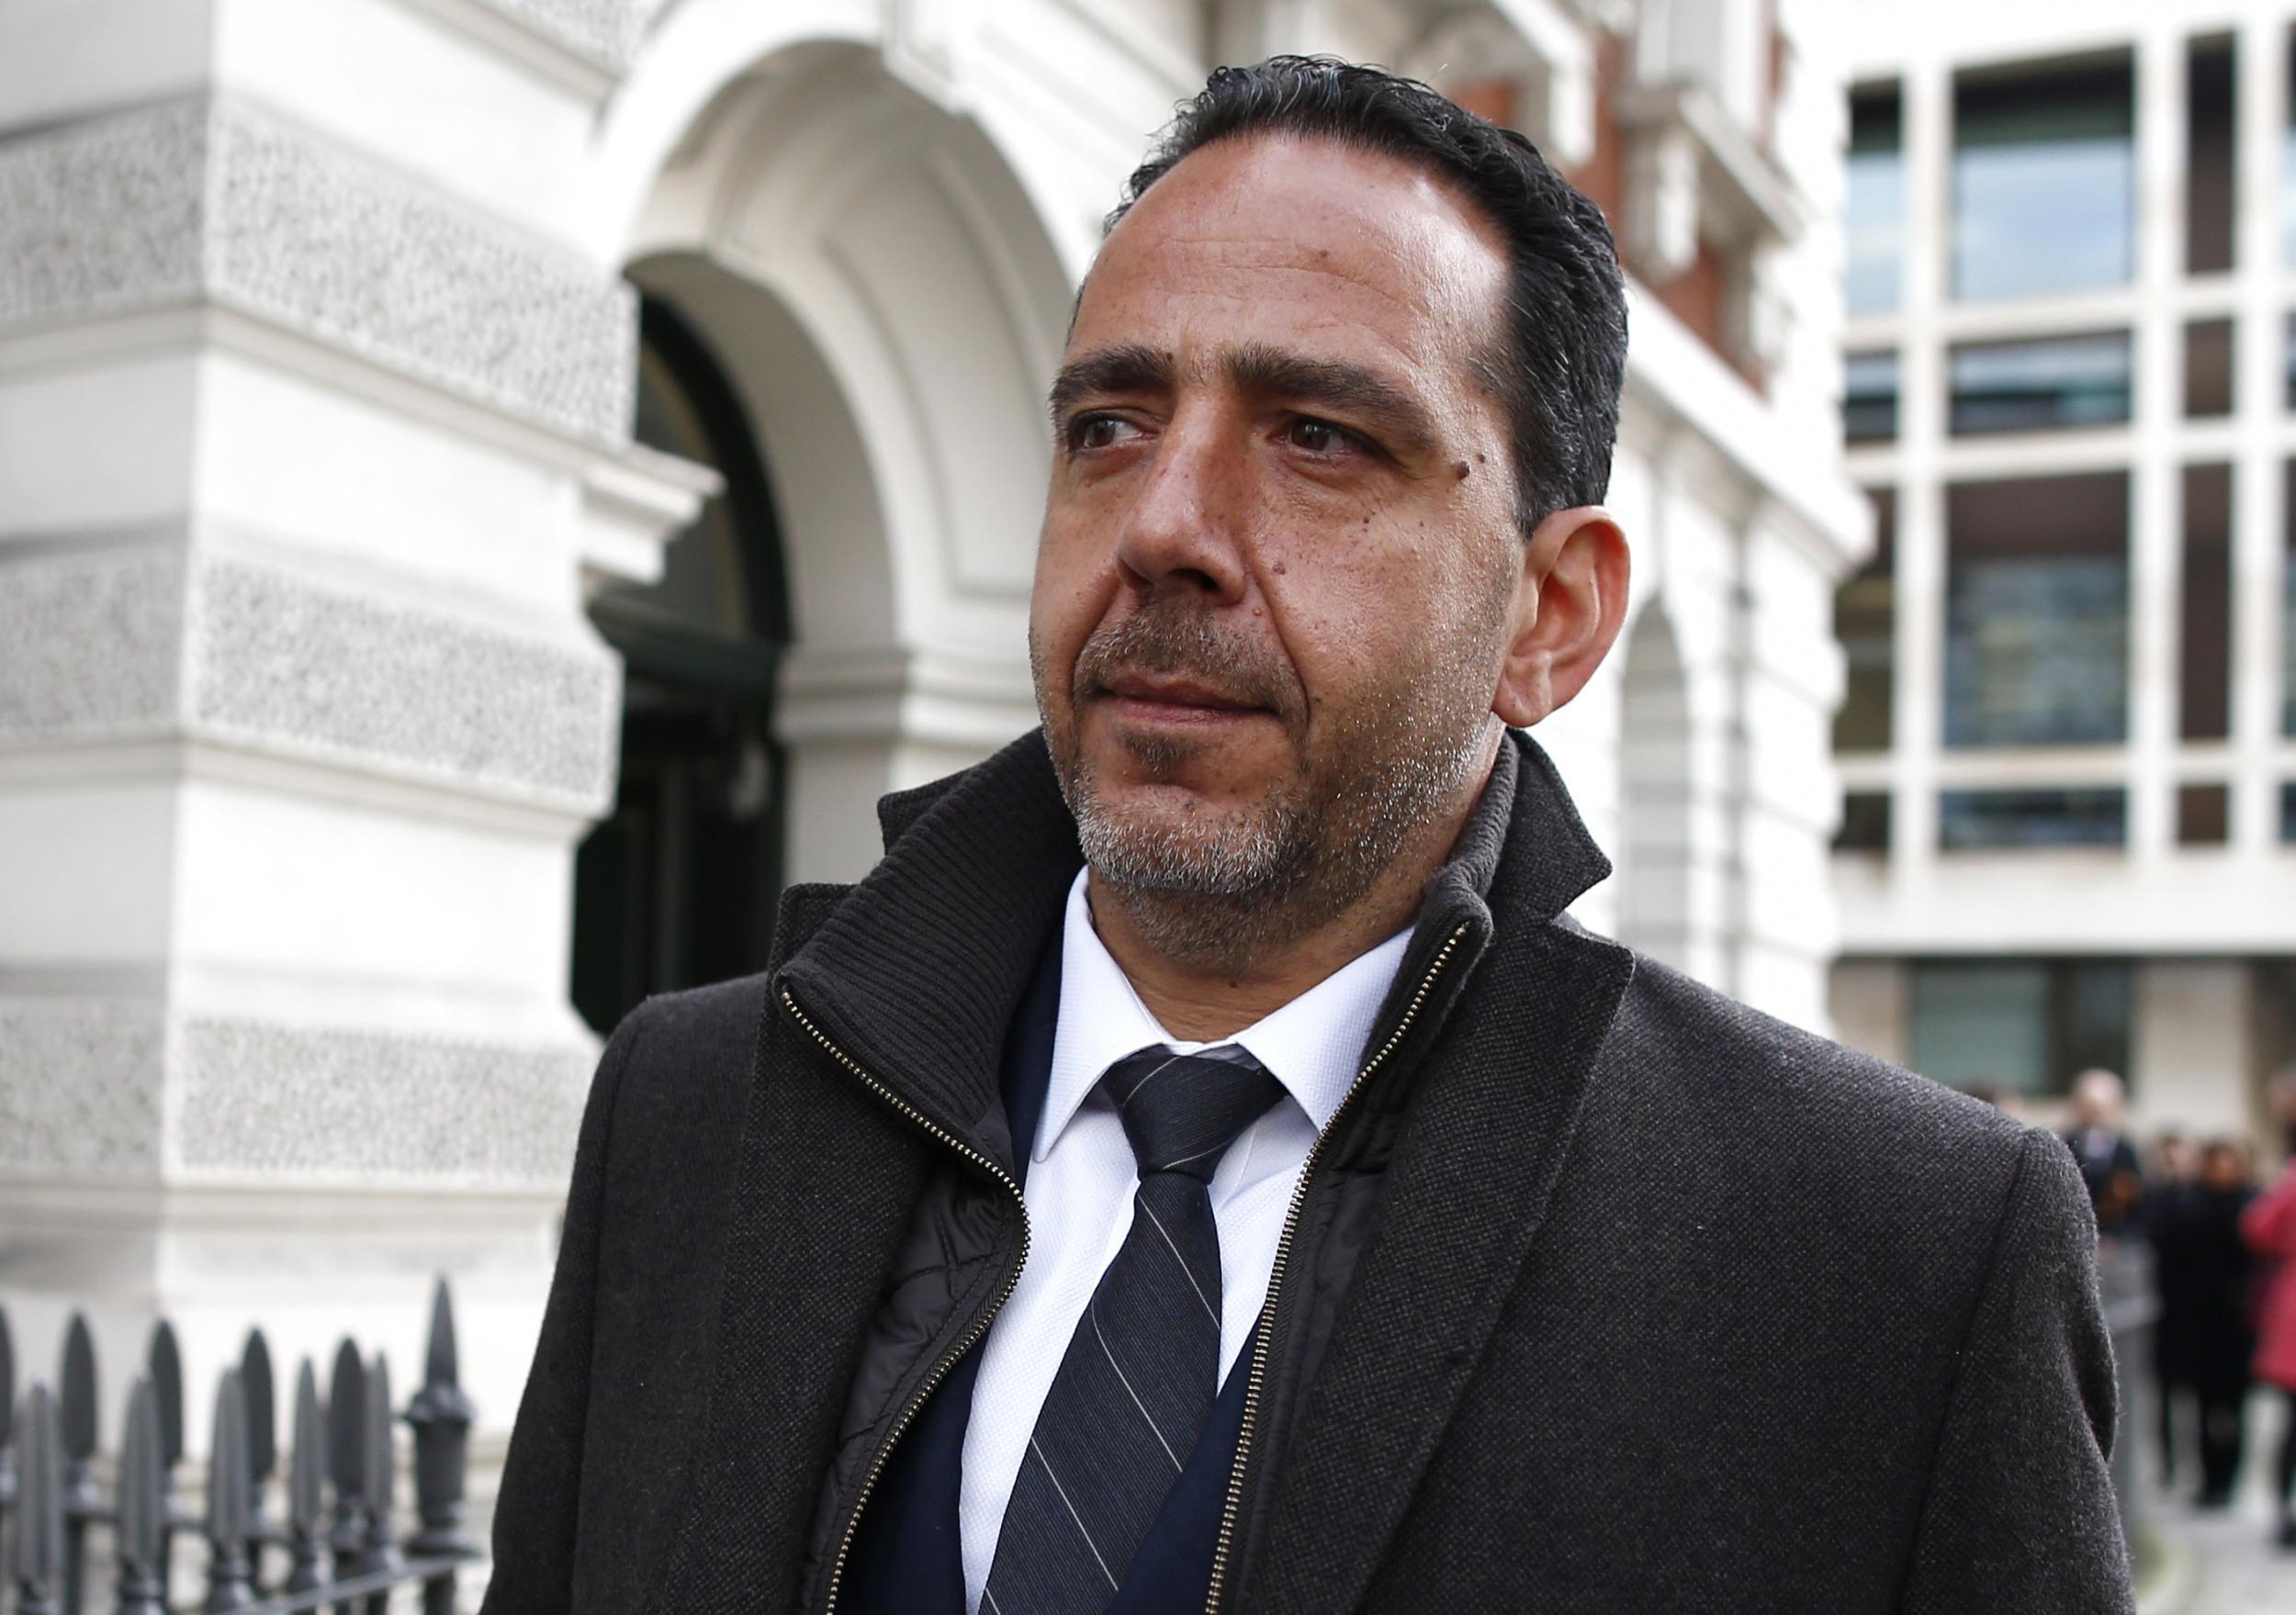 Banker, Christian Bittar, is one of 11 charged with conspiring to manipulate Euribor, six of whom pleaded not guilty on Tuesday